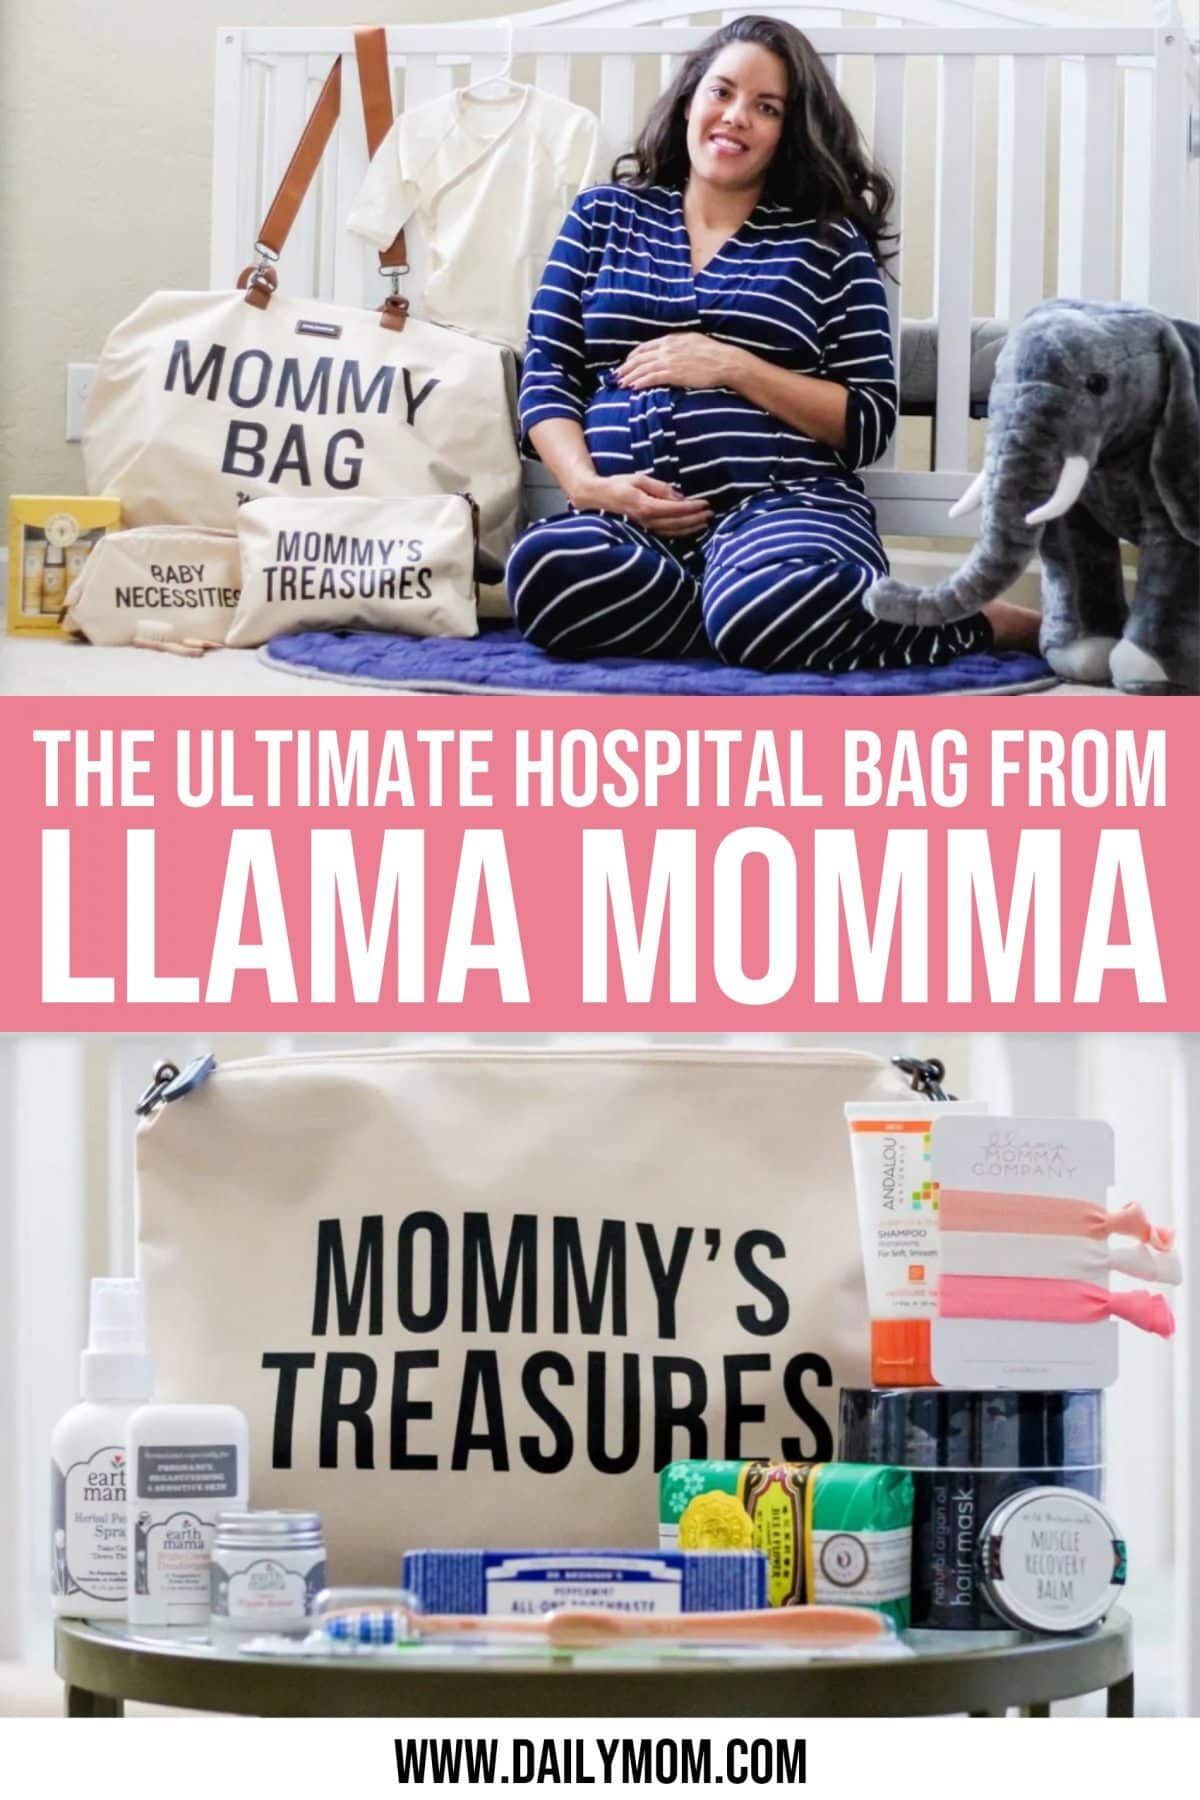 Complete Your Hospital Bag Checklist With The Ultimate Hospital Bag